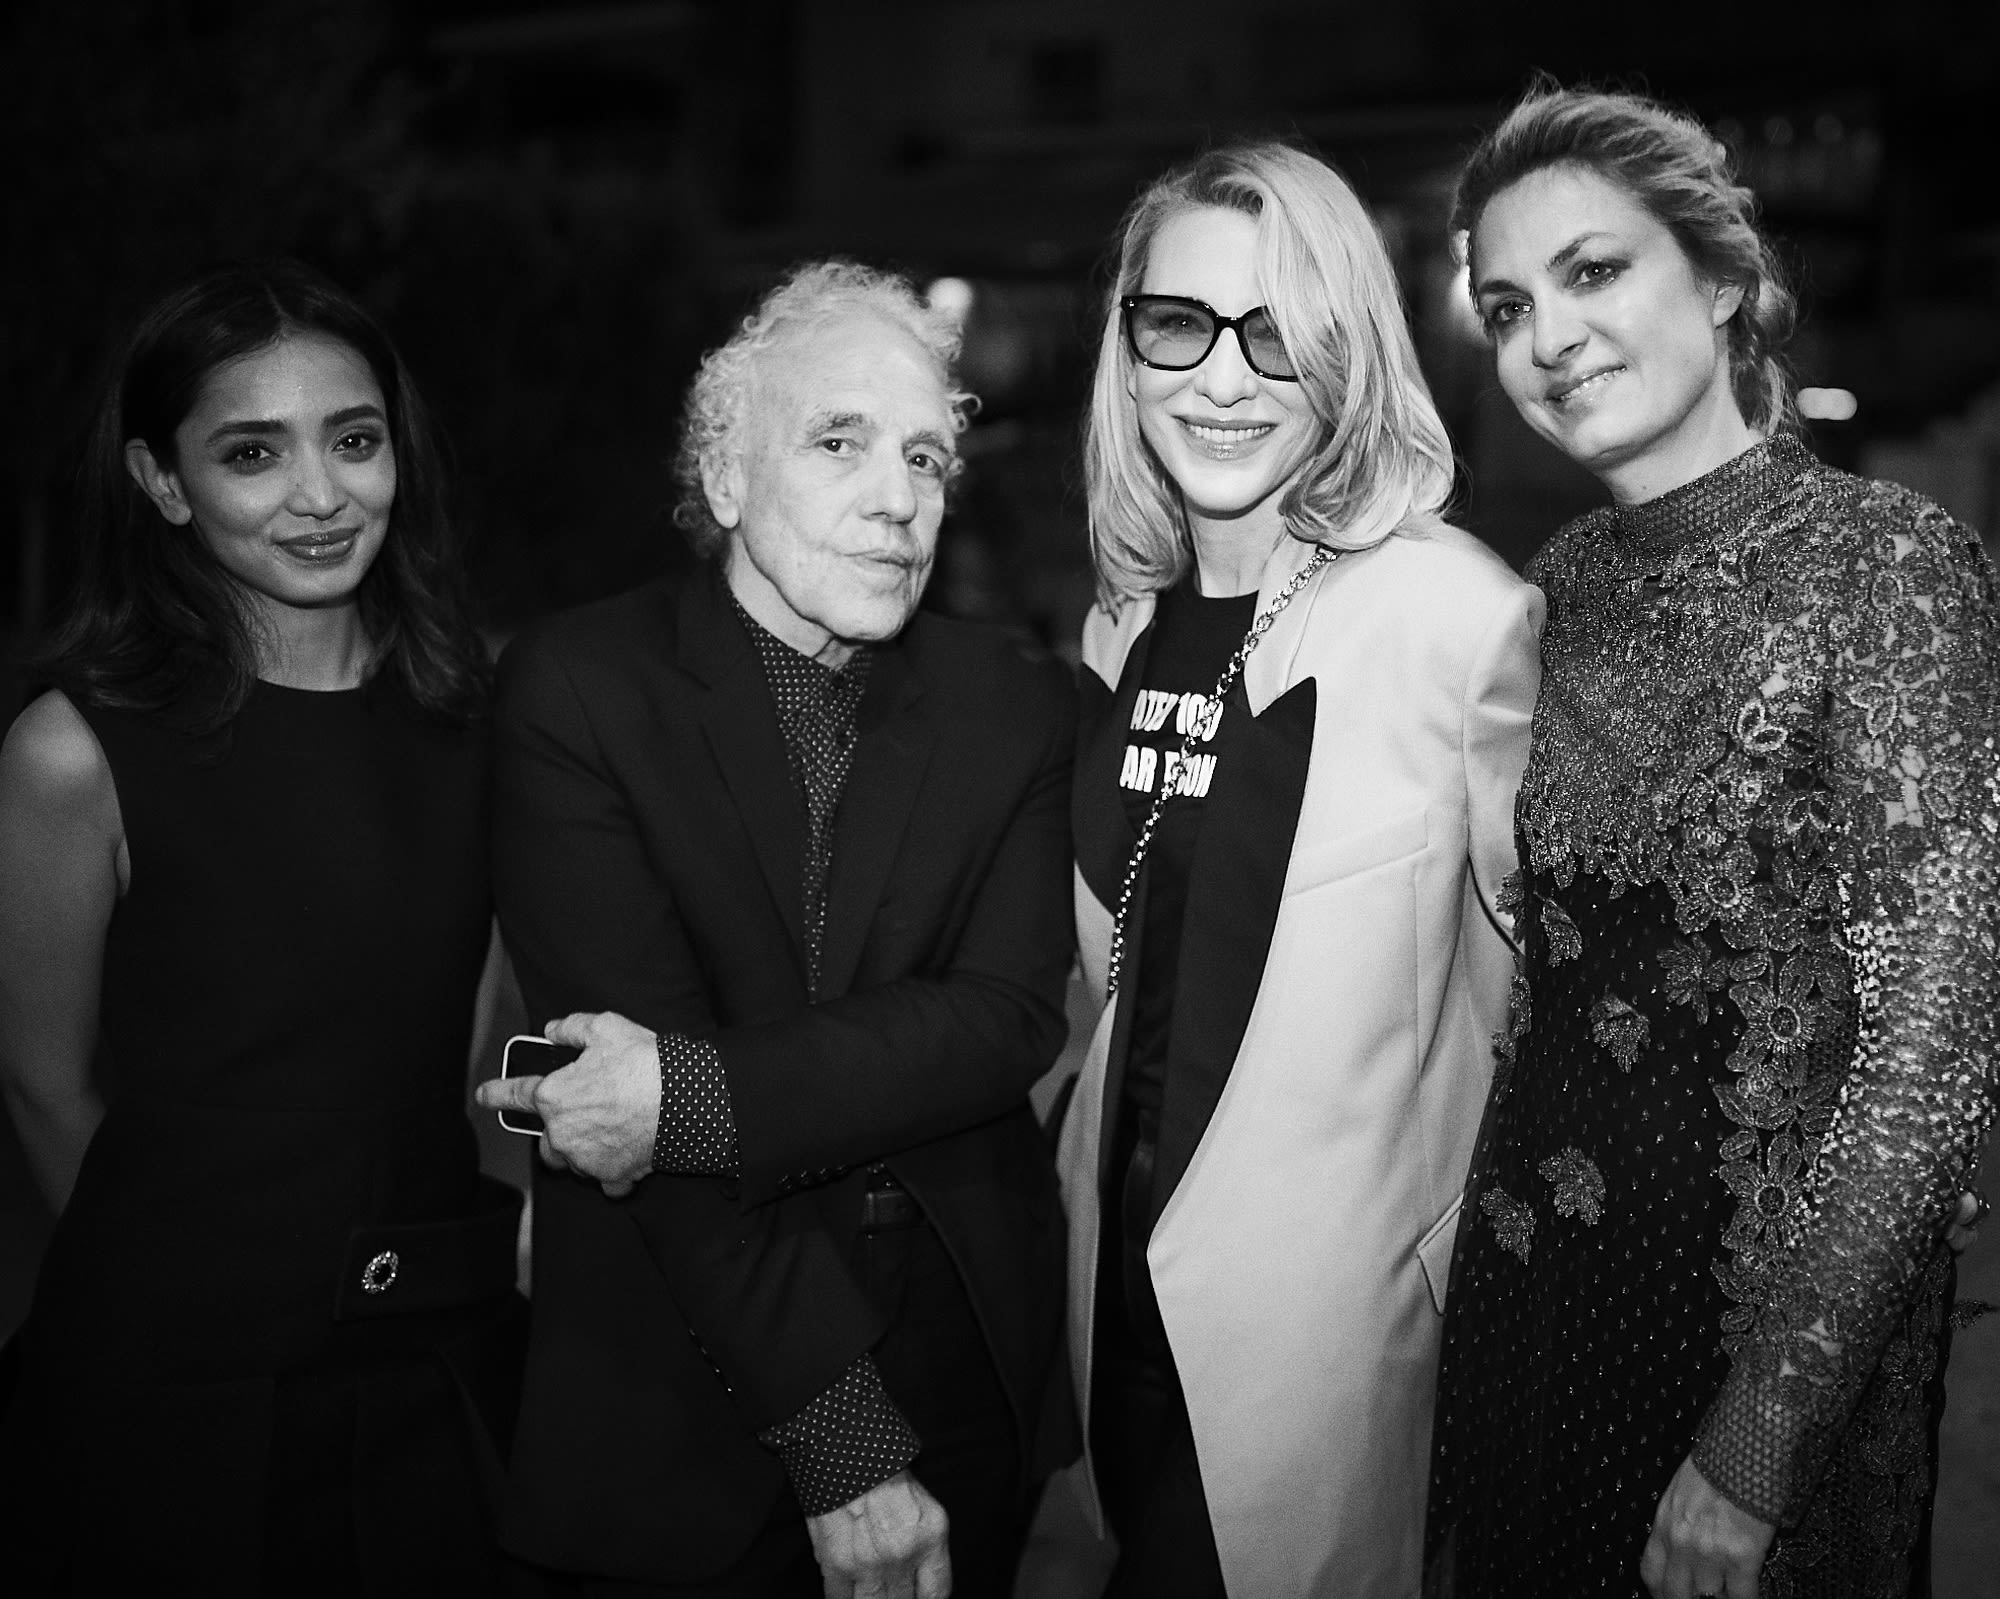 Lanvin and Charles Finch Fete Filmmakers During the Cannes Film Festival